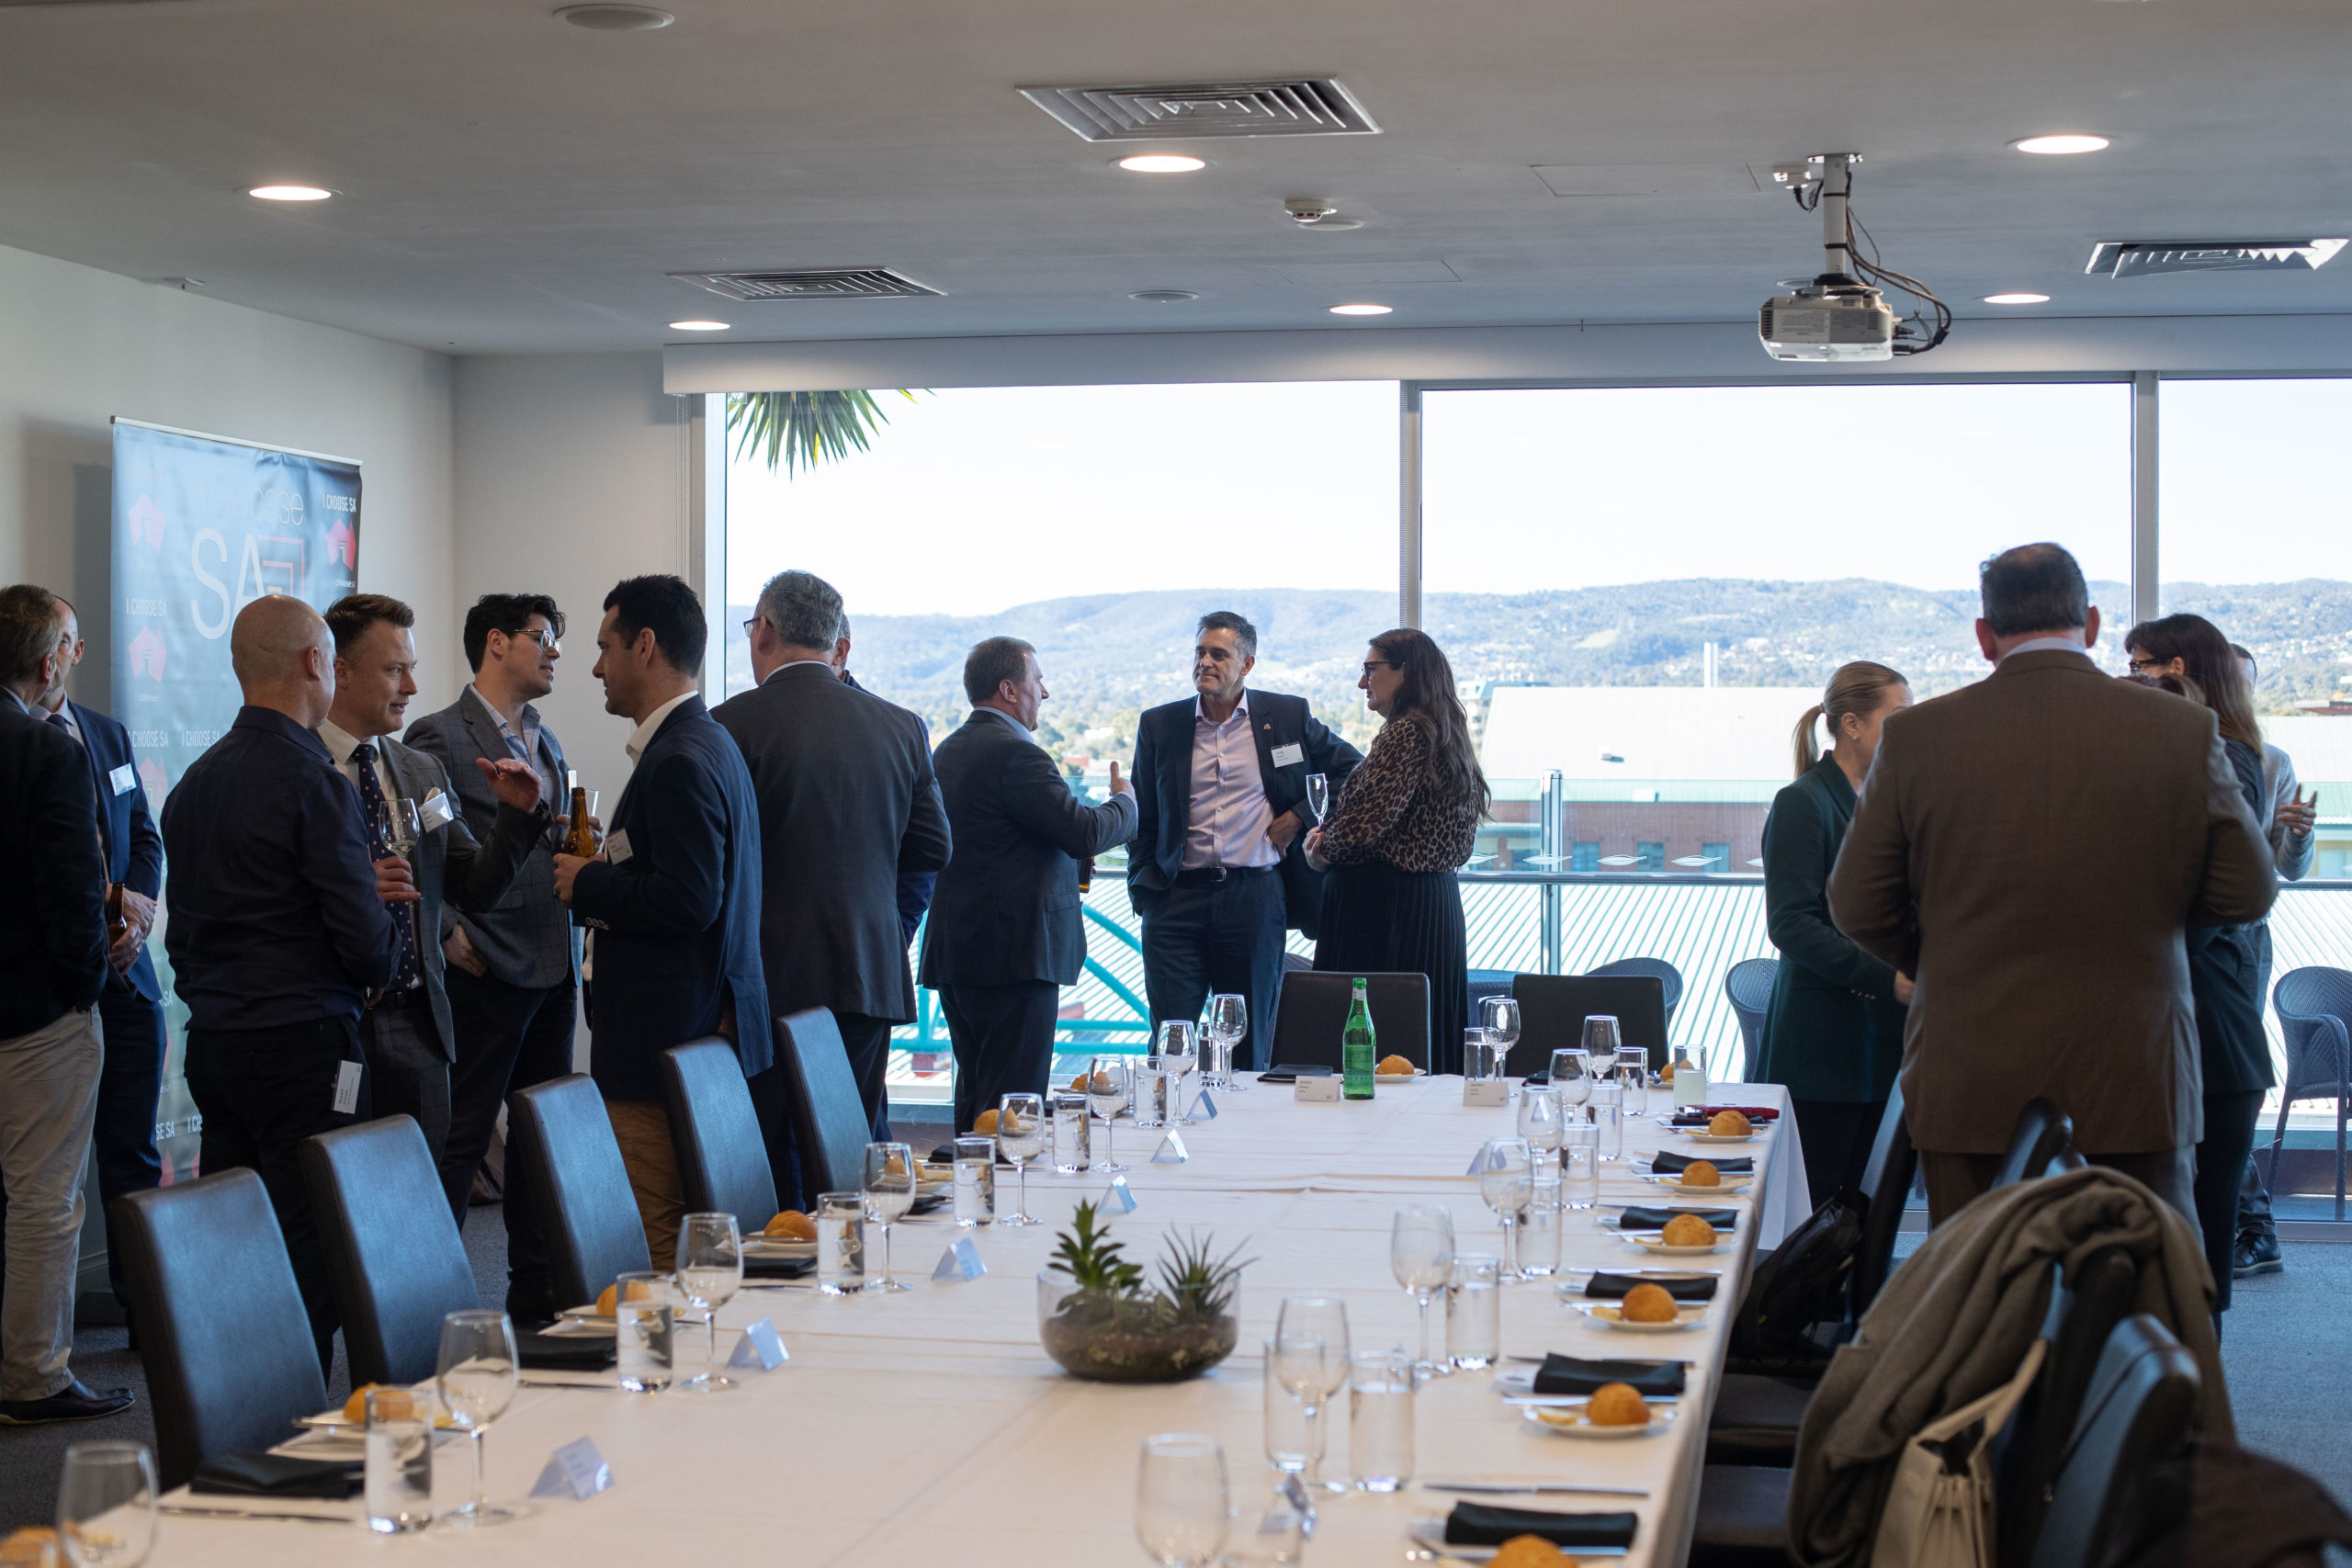 Showcase SA Inspiring Leaders Lunch with Stuart O'Grady at Majestic Rooftop Hotel (July 2020)